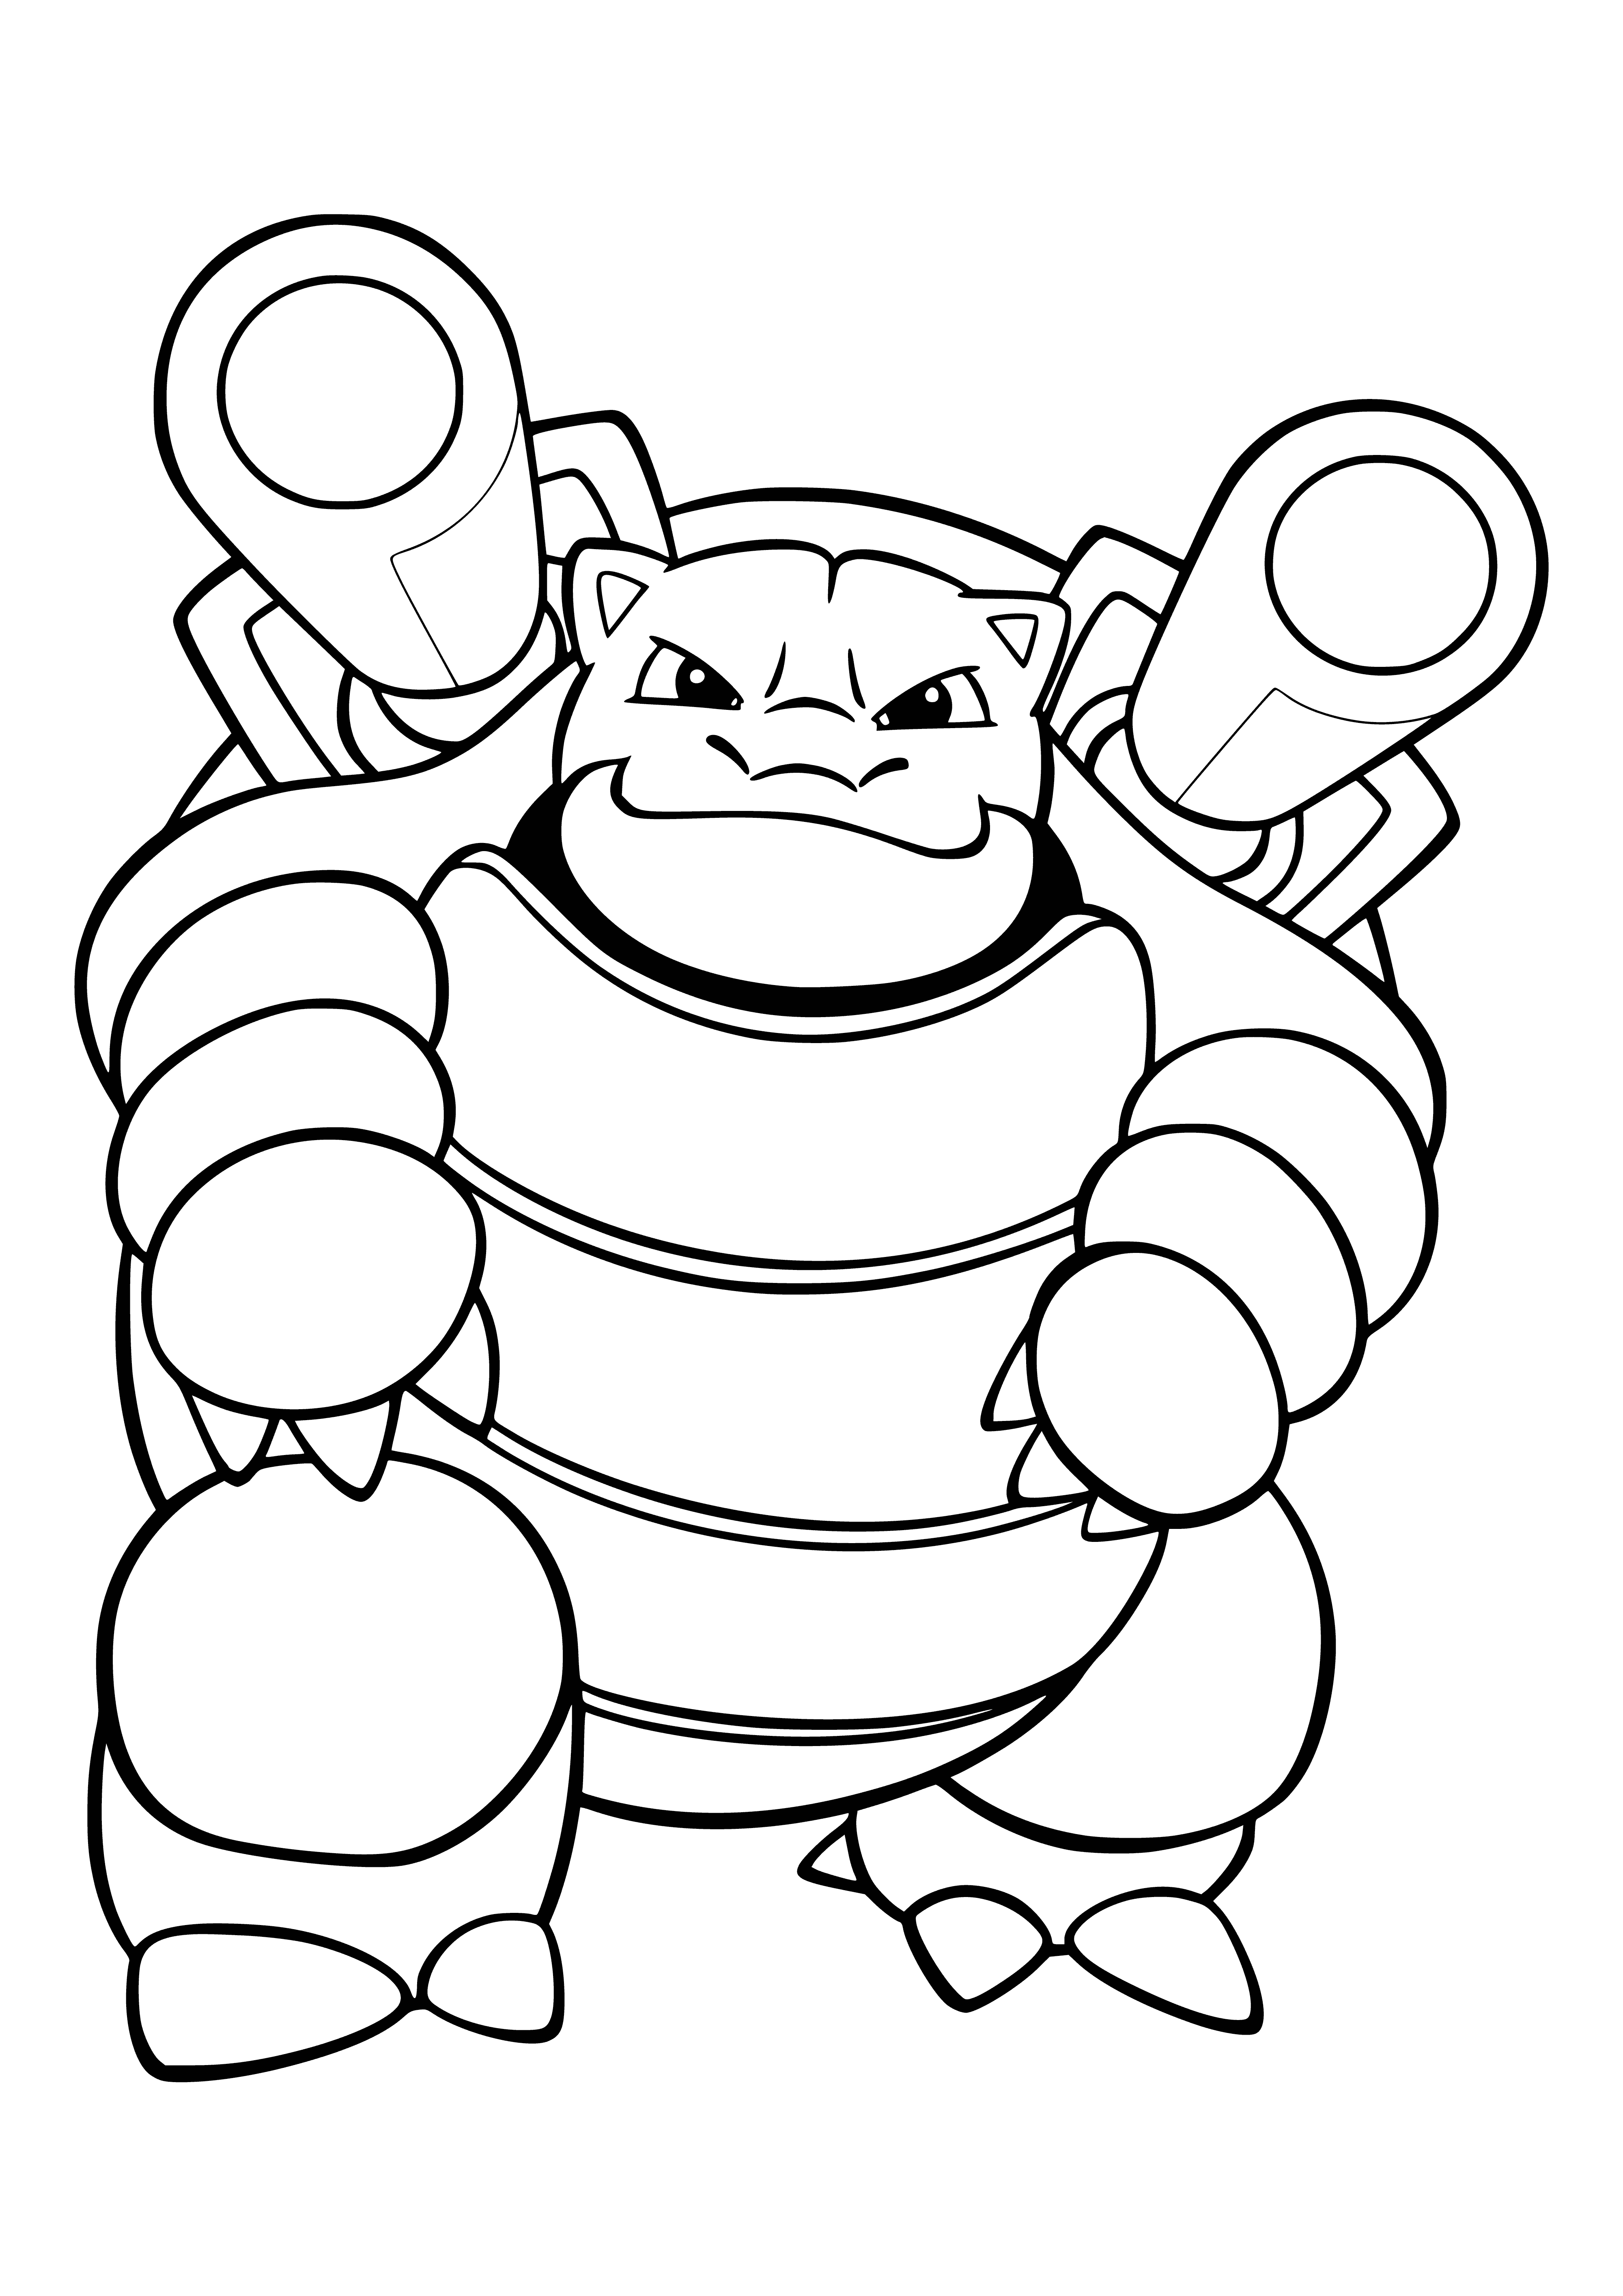 coloring page: Large blue Pokemon has hard brown shell and 2 cannons protruding from its back.